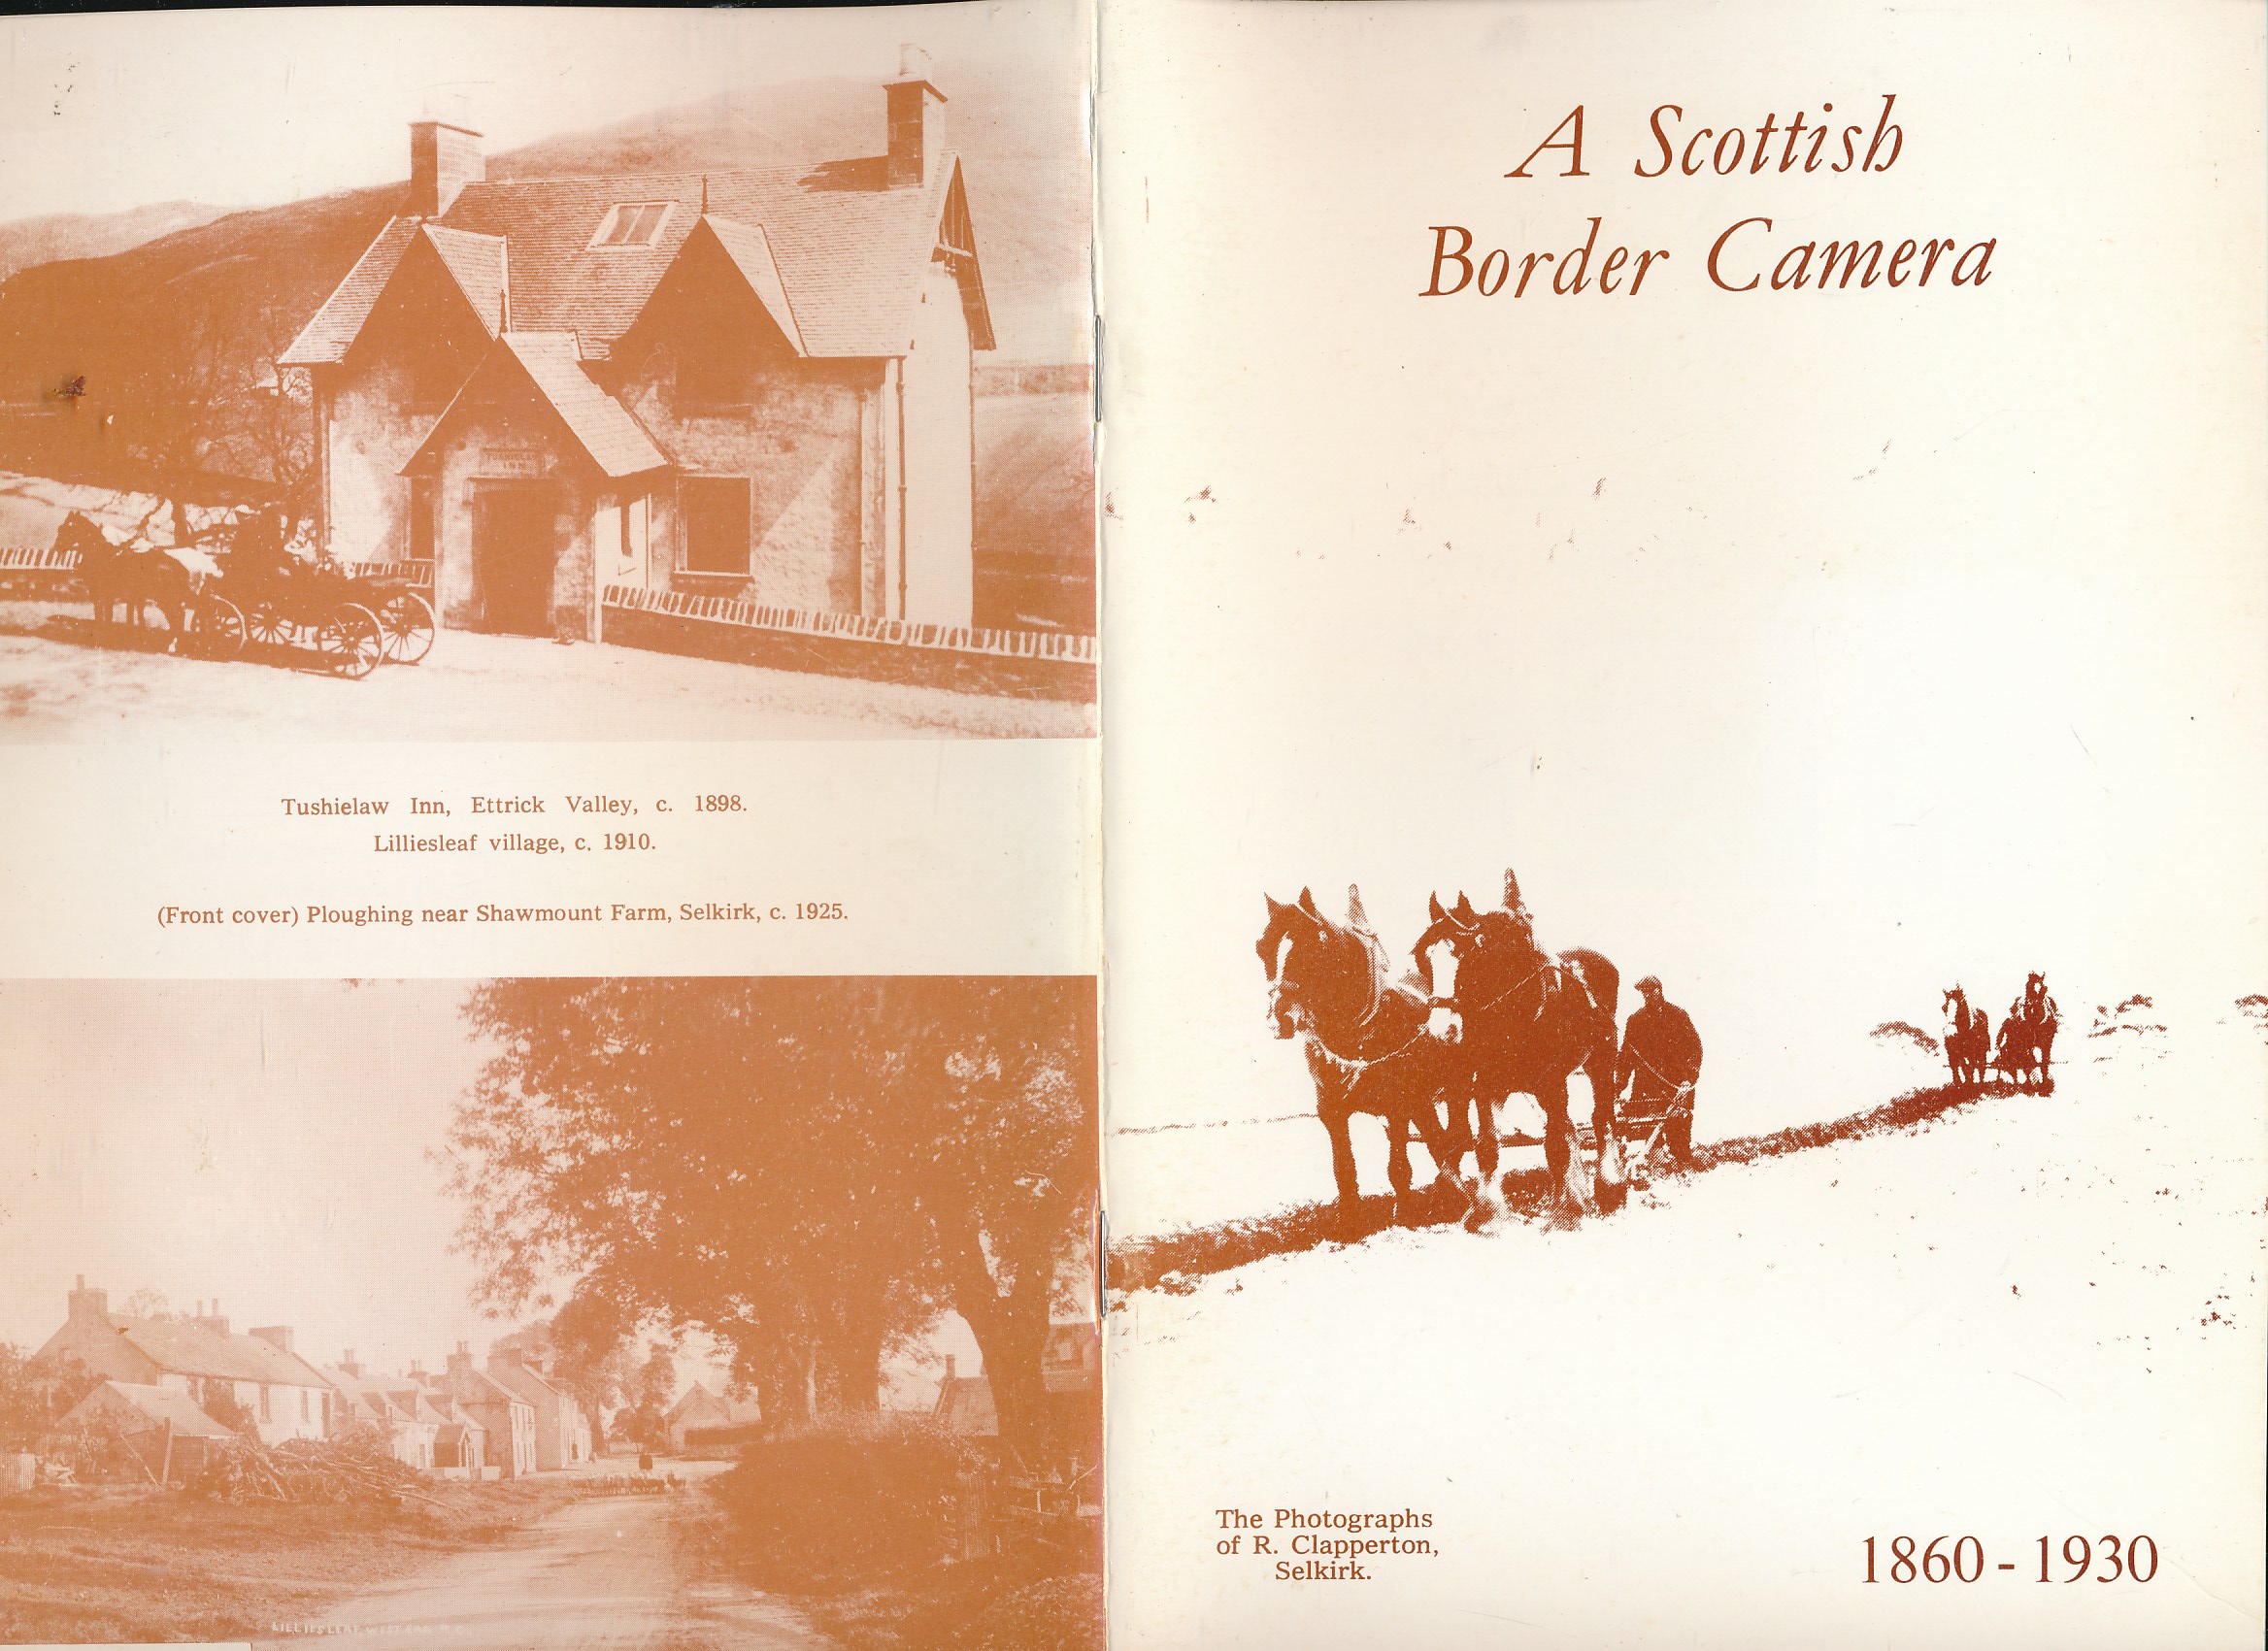 A Scottish Border Camera 1860-1930. The Photographs of R. Clapperton, Selkirk